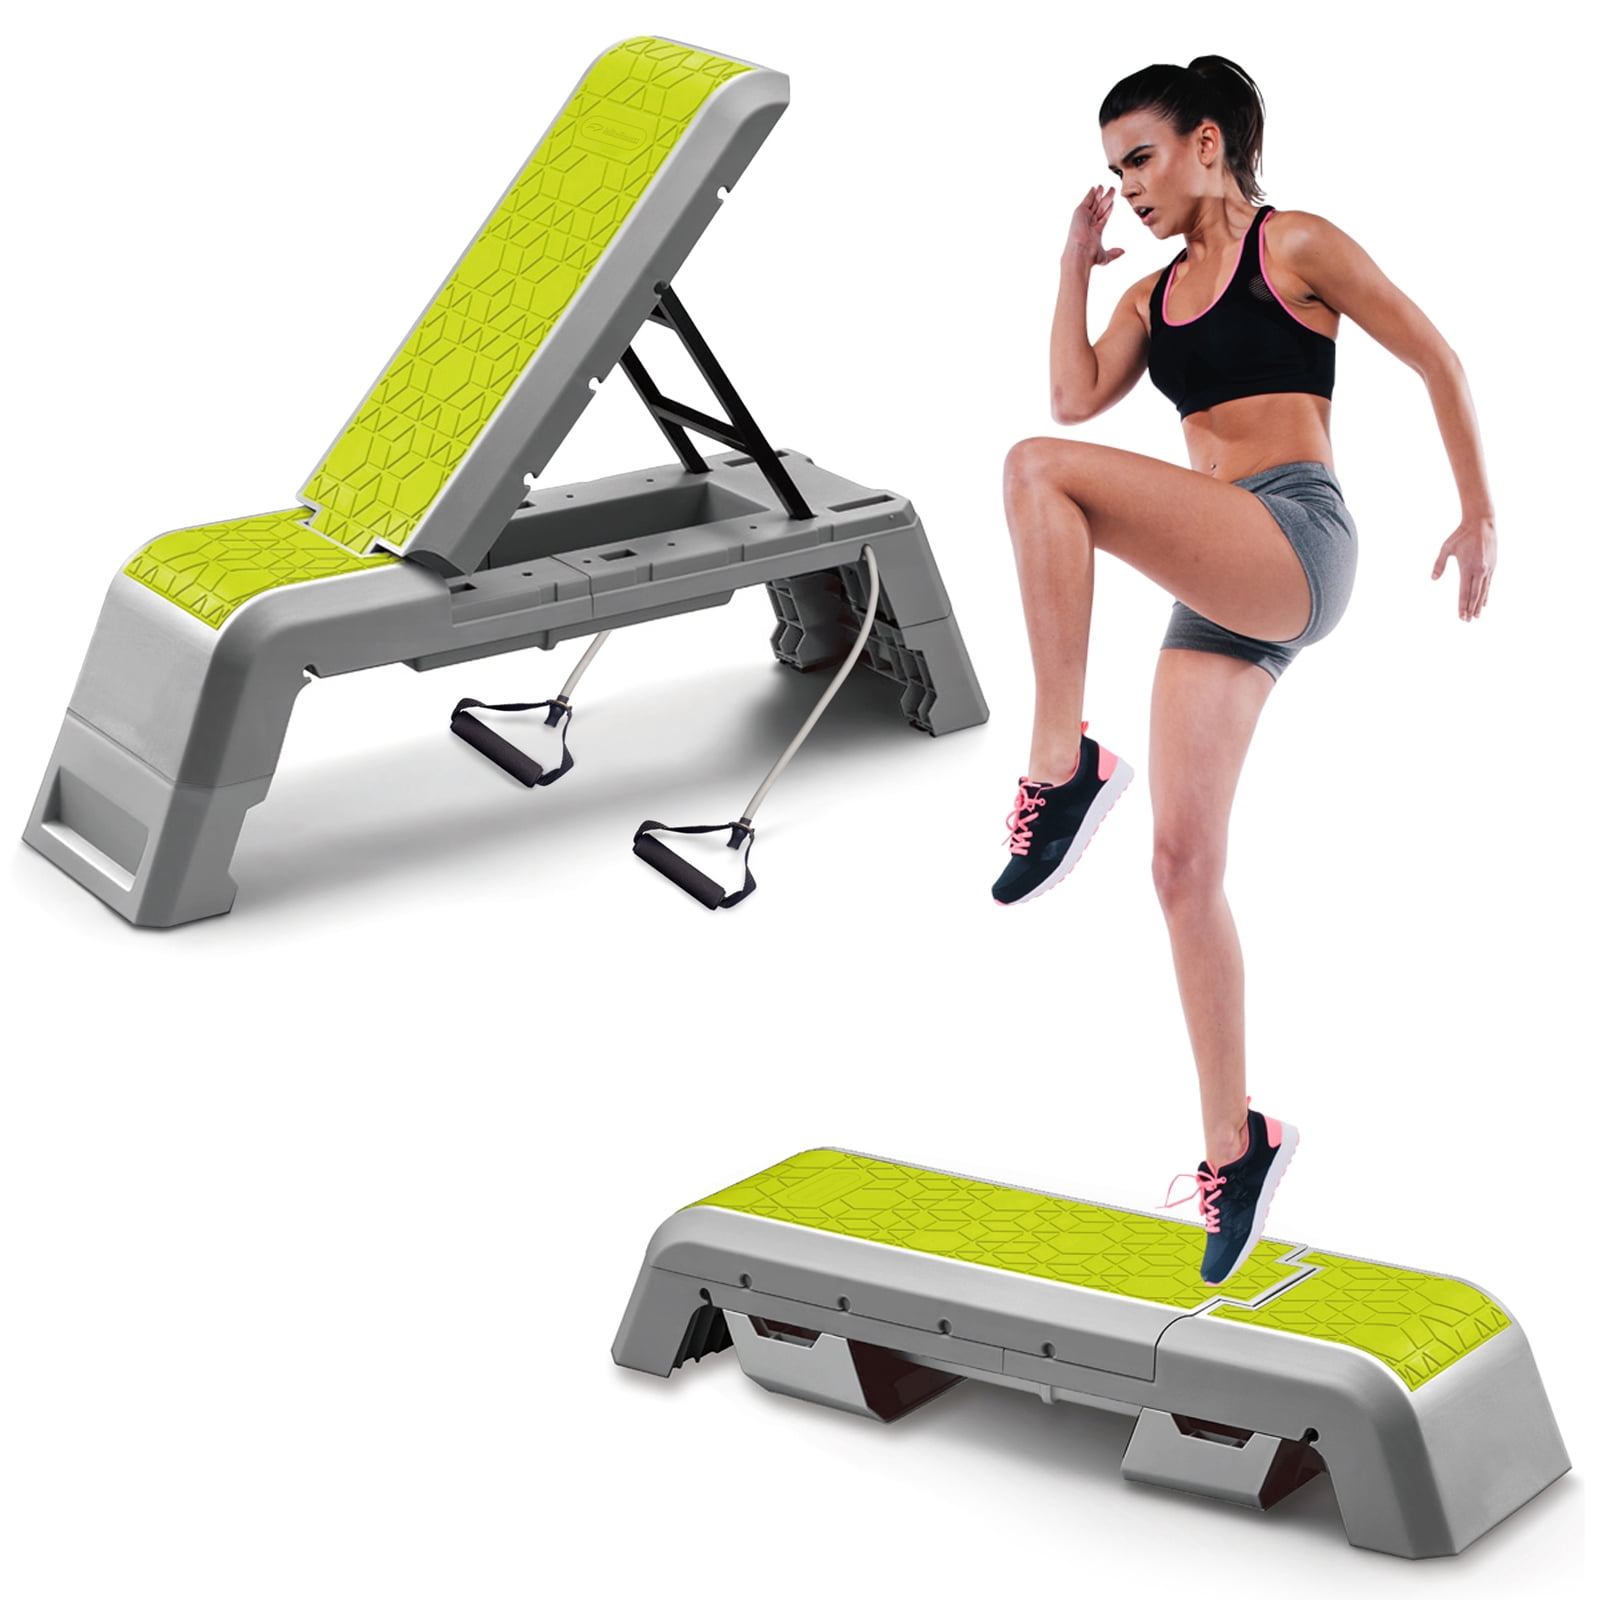 Leikefitness 47" Aerobic Fitness Workout Home Adjustable in 1 Deck Exercise Step Platform with Resistance GM5820 Green Walmart.com